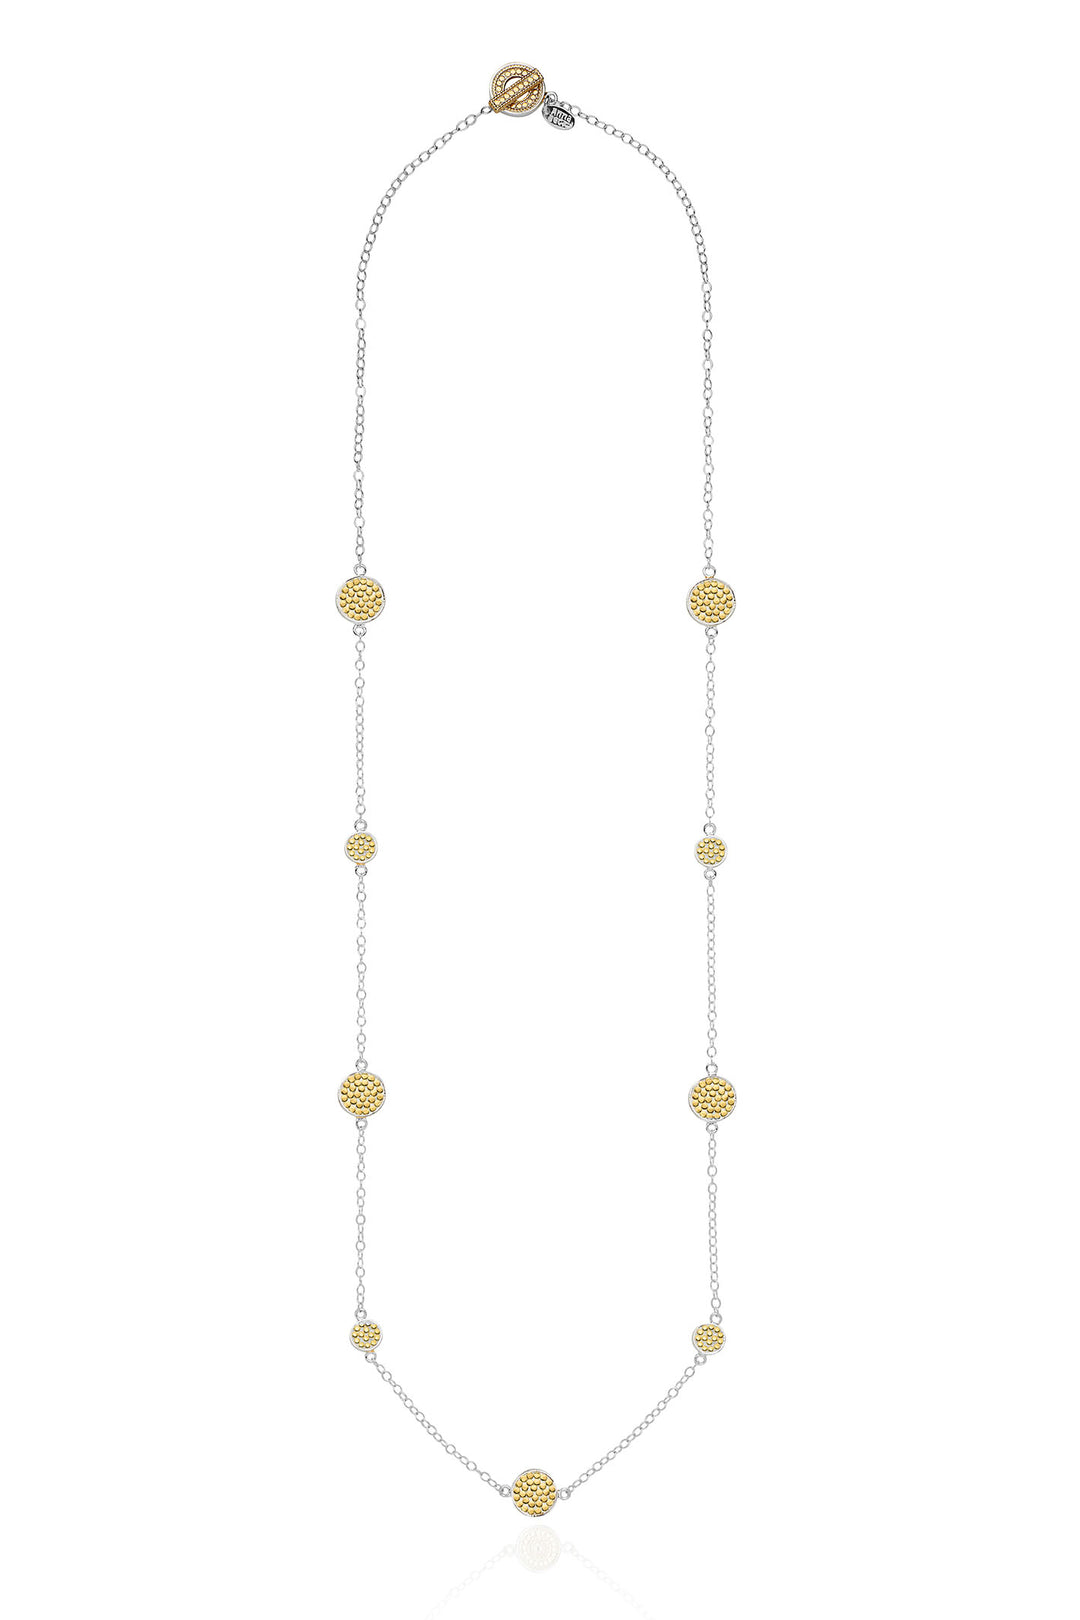 Anna Beck 1181NGR-TWT Classic Long Multi-Disc Station Necklace - Olivia Grace Fashion